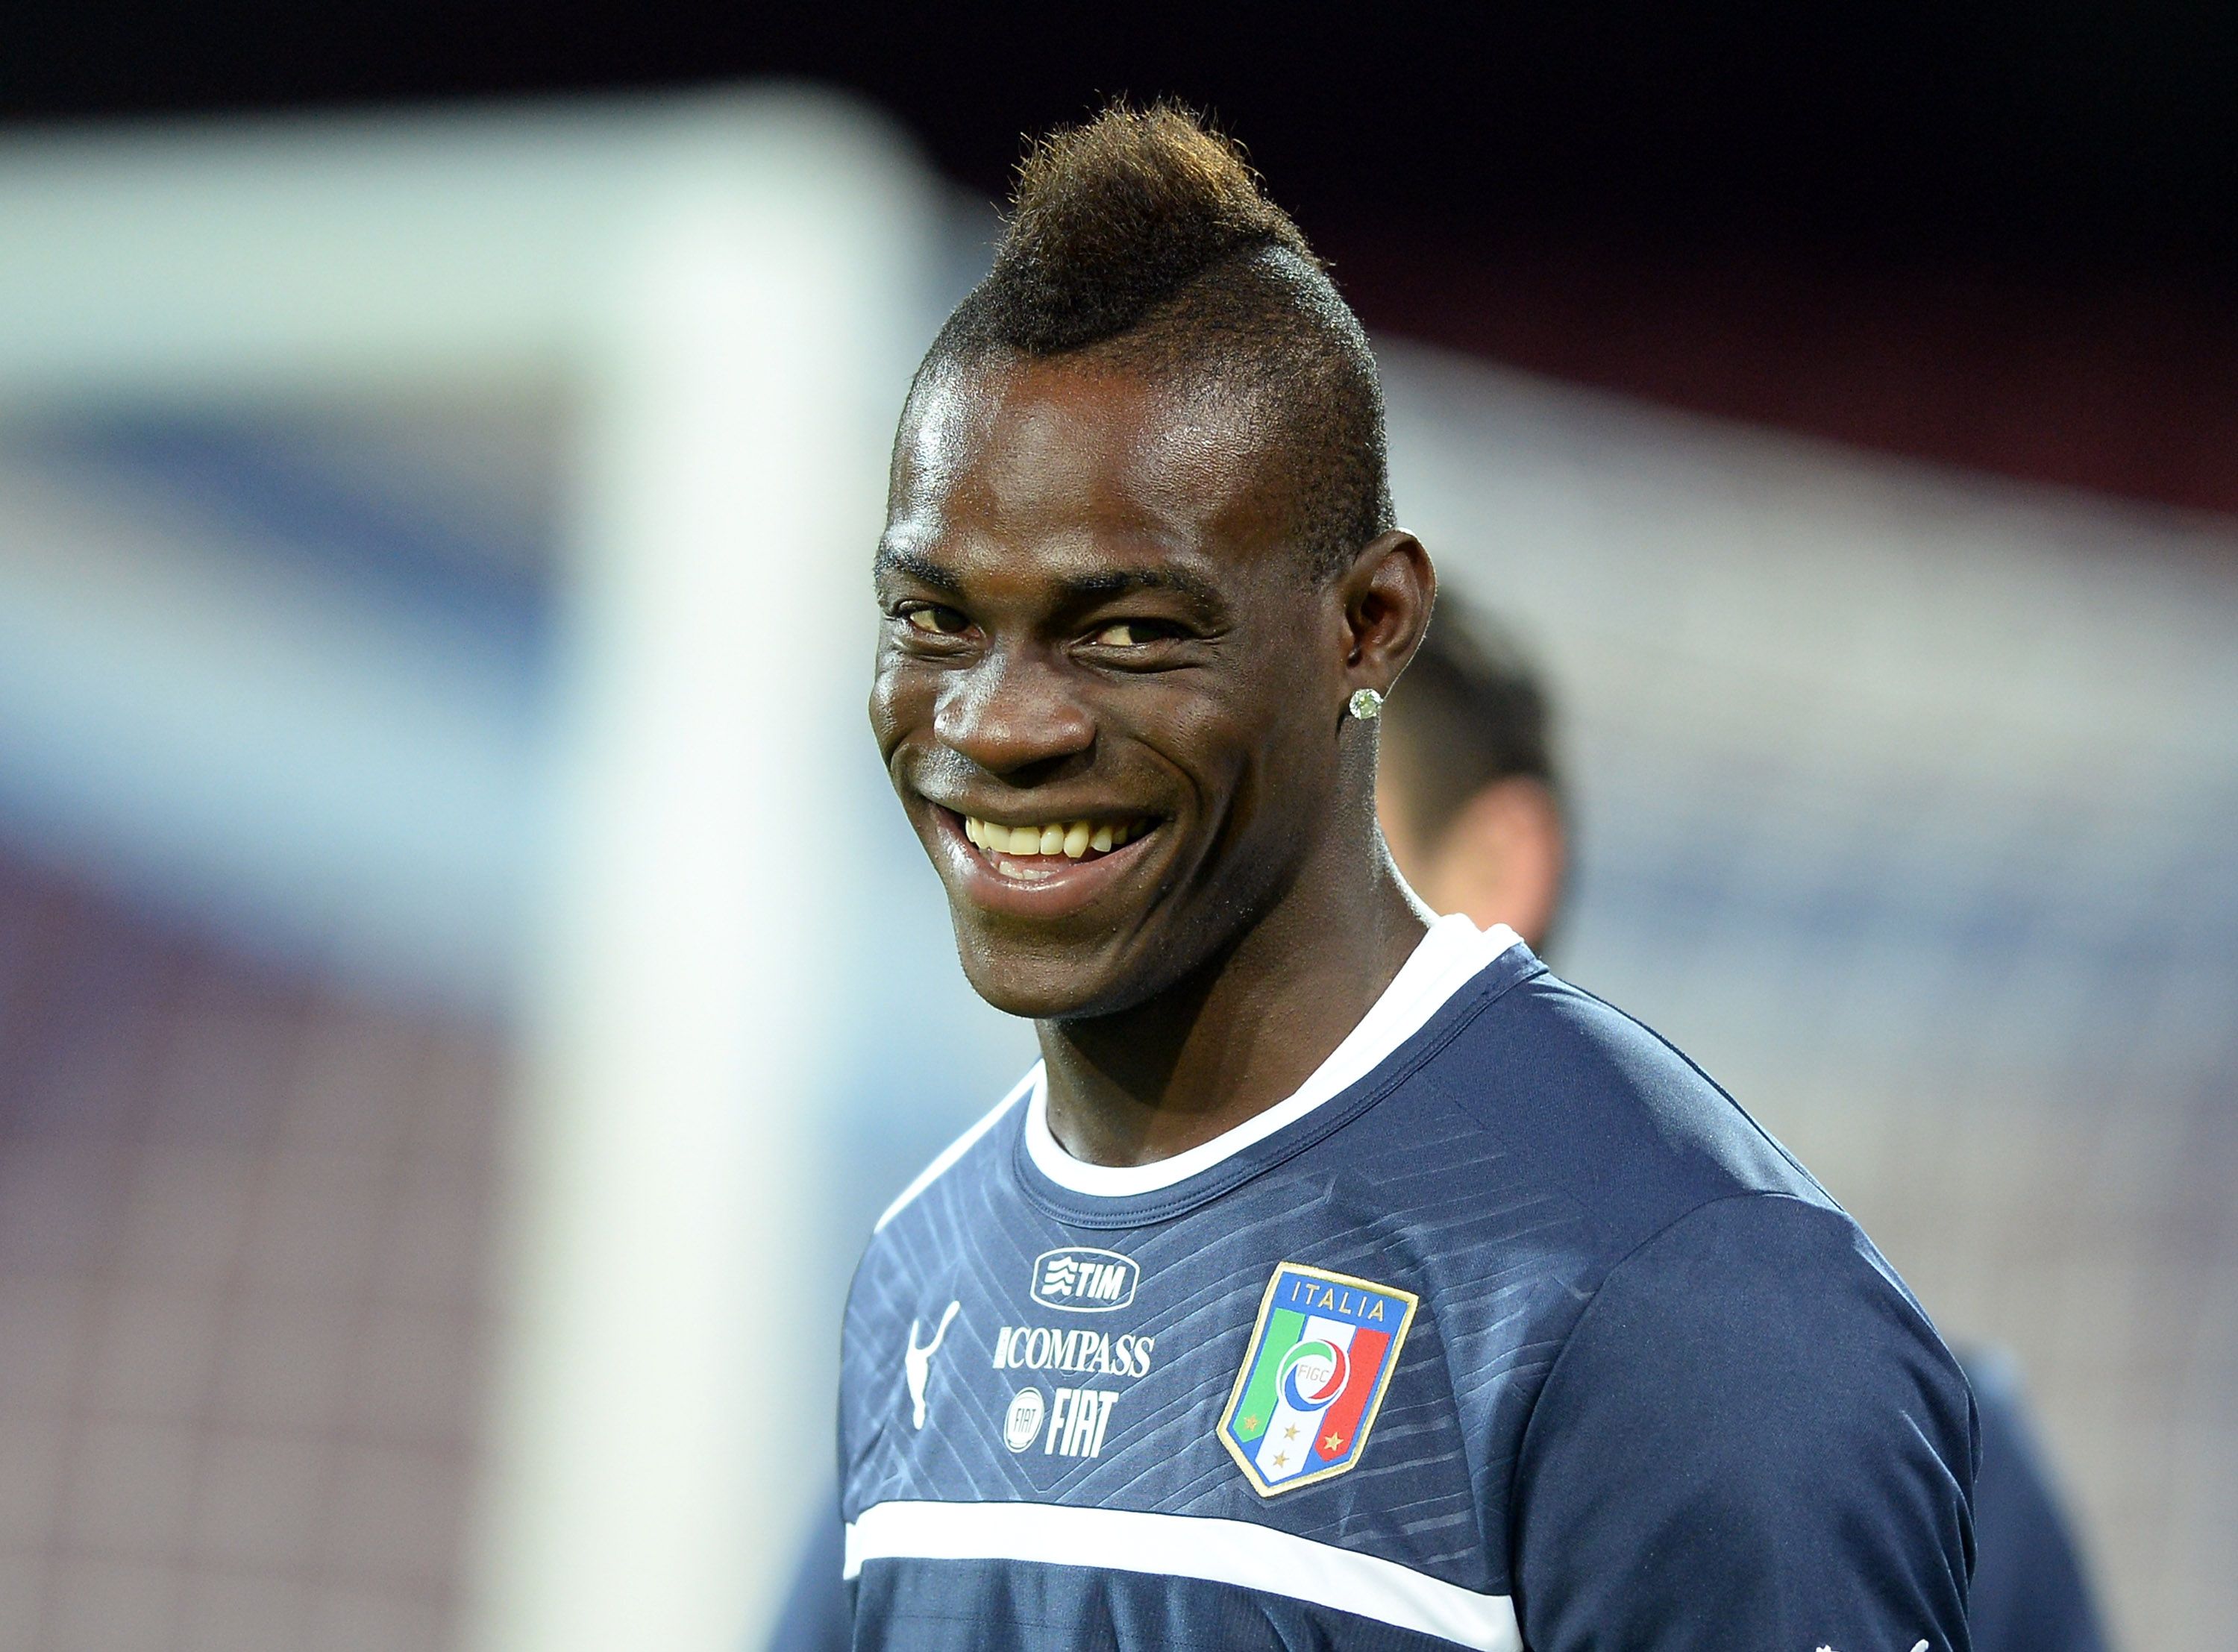 Mario Balotelli smiles during a training session for the Italian football national team